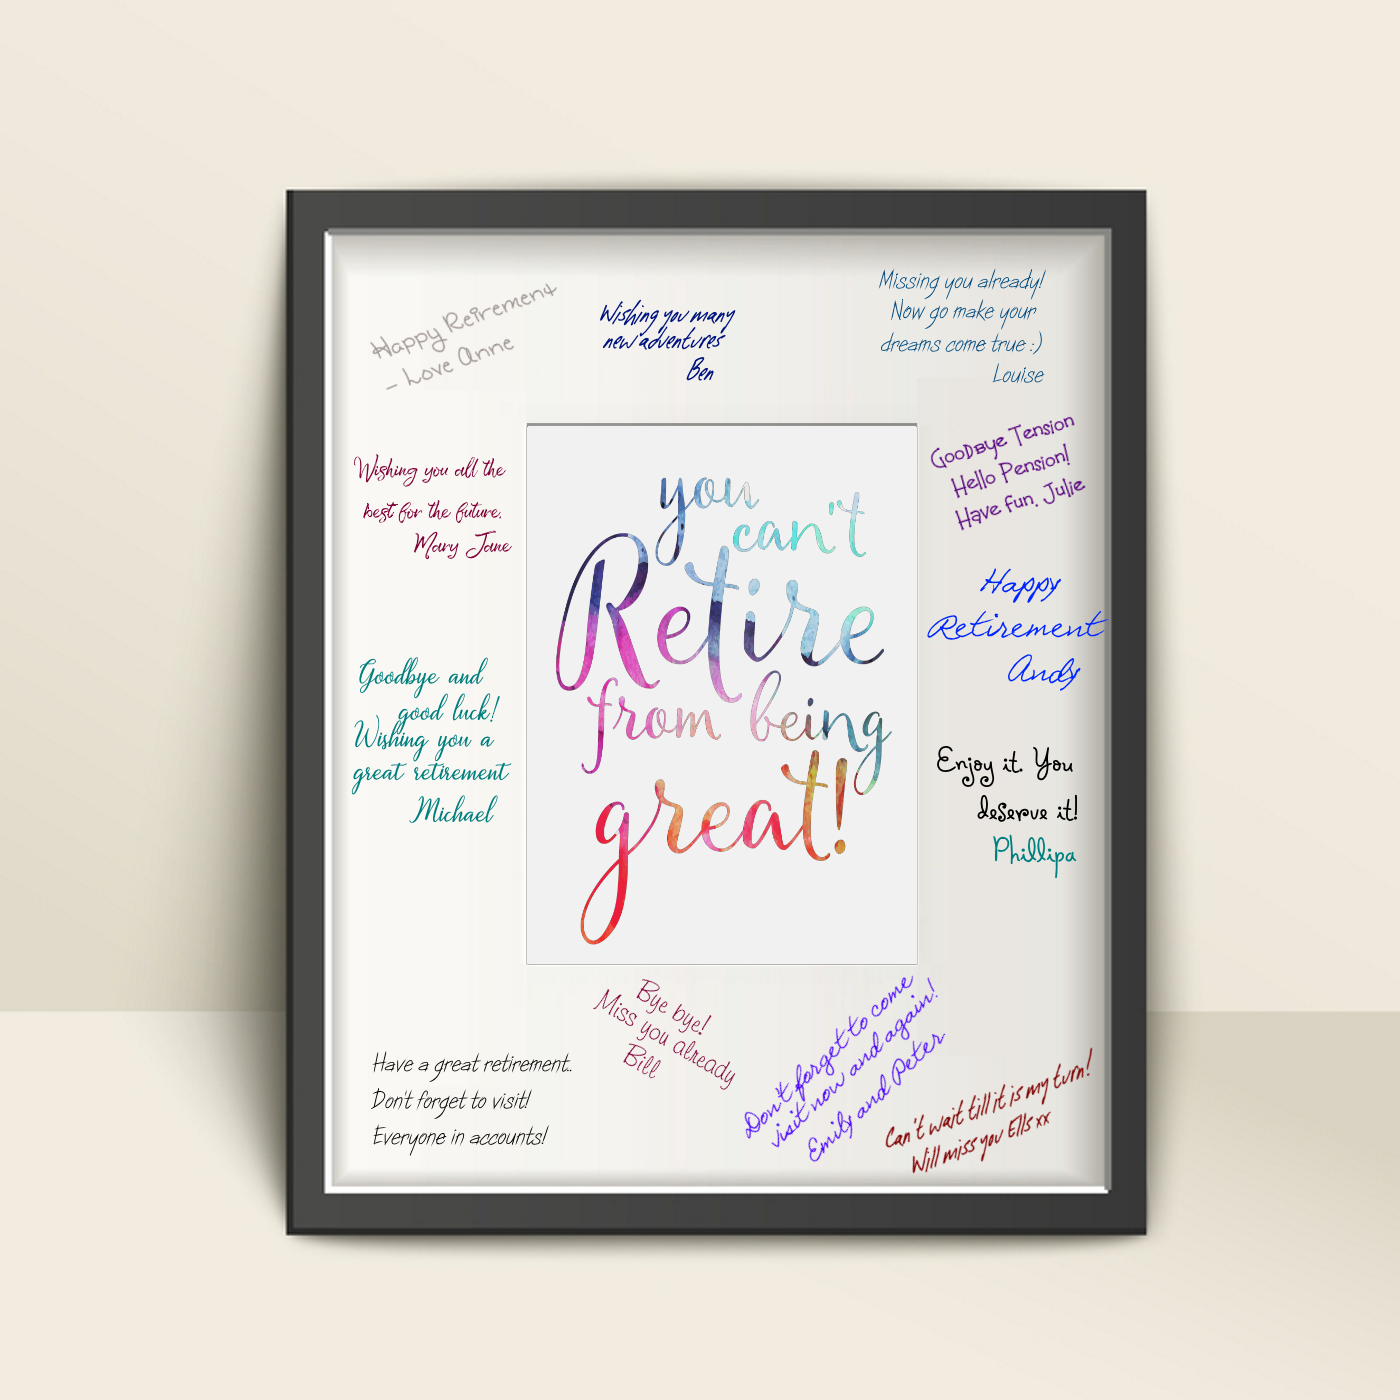 You can't retire from being great - gift print with large mat for signing